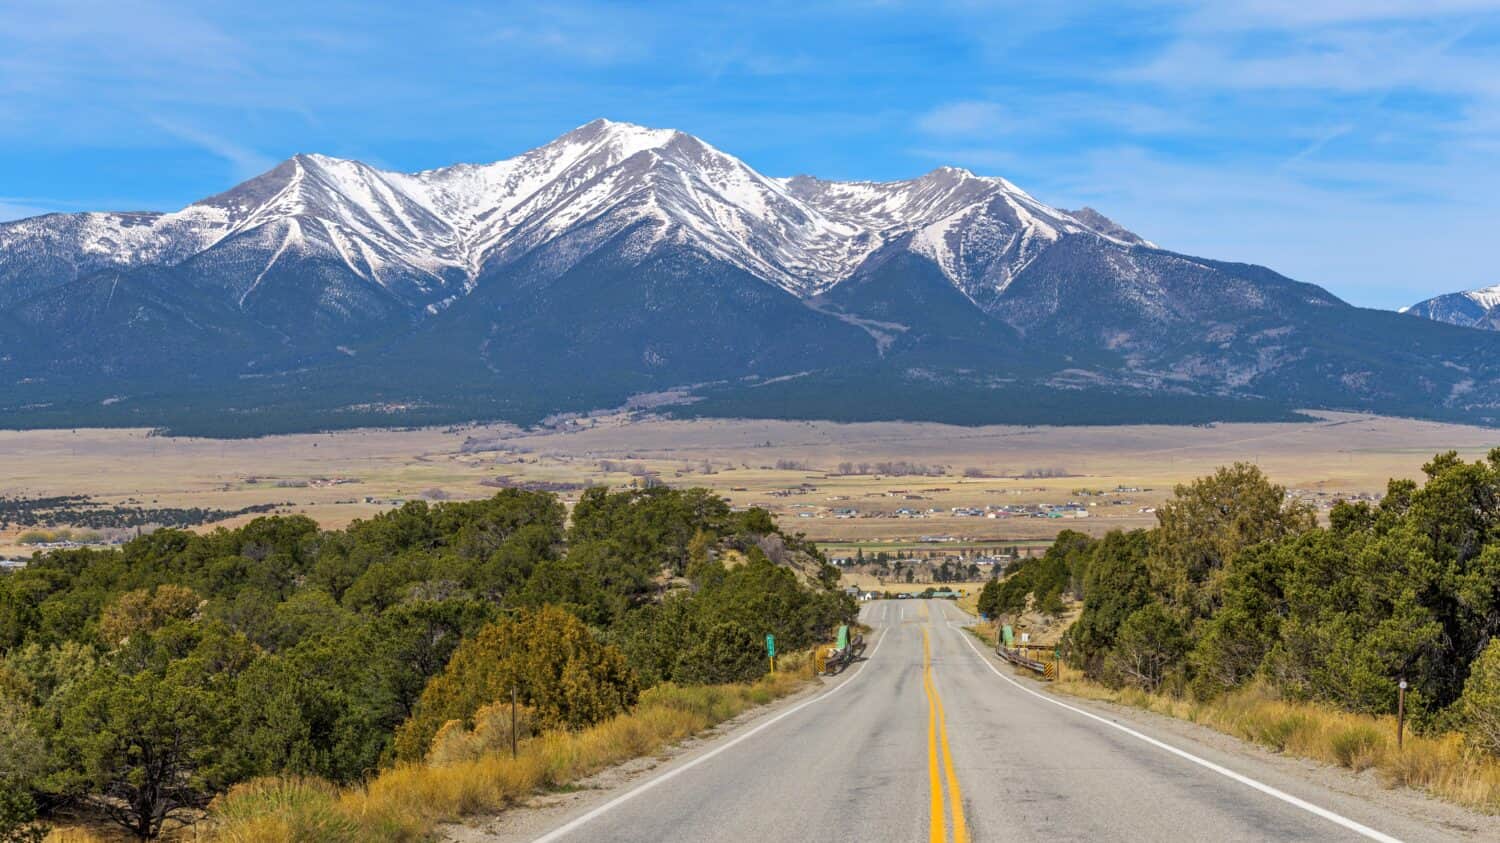 Mount Princeton - A panoramic Spring morning view of Snow-capped Mount Princeton, towering above Buena Vista at Arkansas Valley, as seen from U.S. Route 285, Colorado, USA.